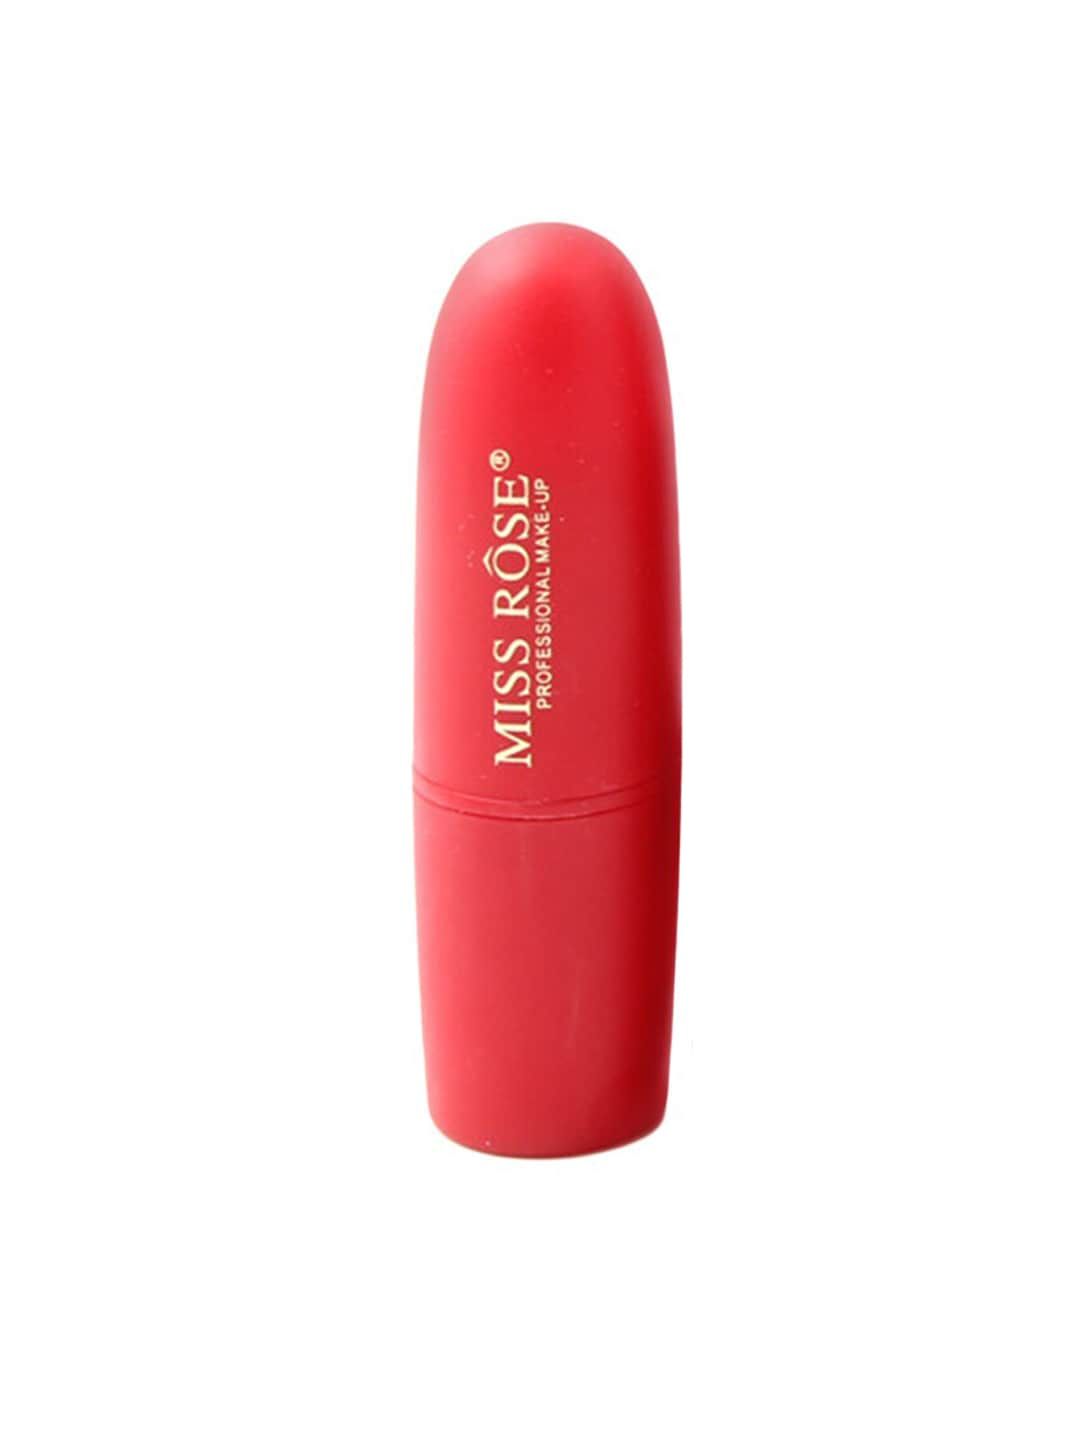 MISS ROSE Creamy Matte Bullet Lipstick - Shade 35 Passion Price in India